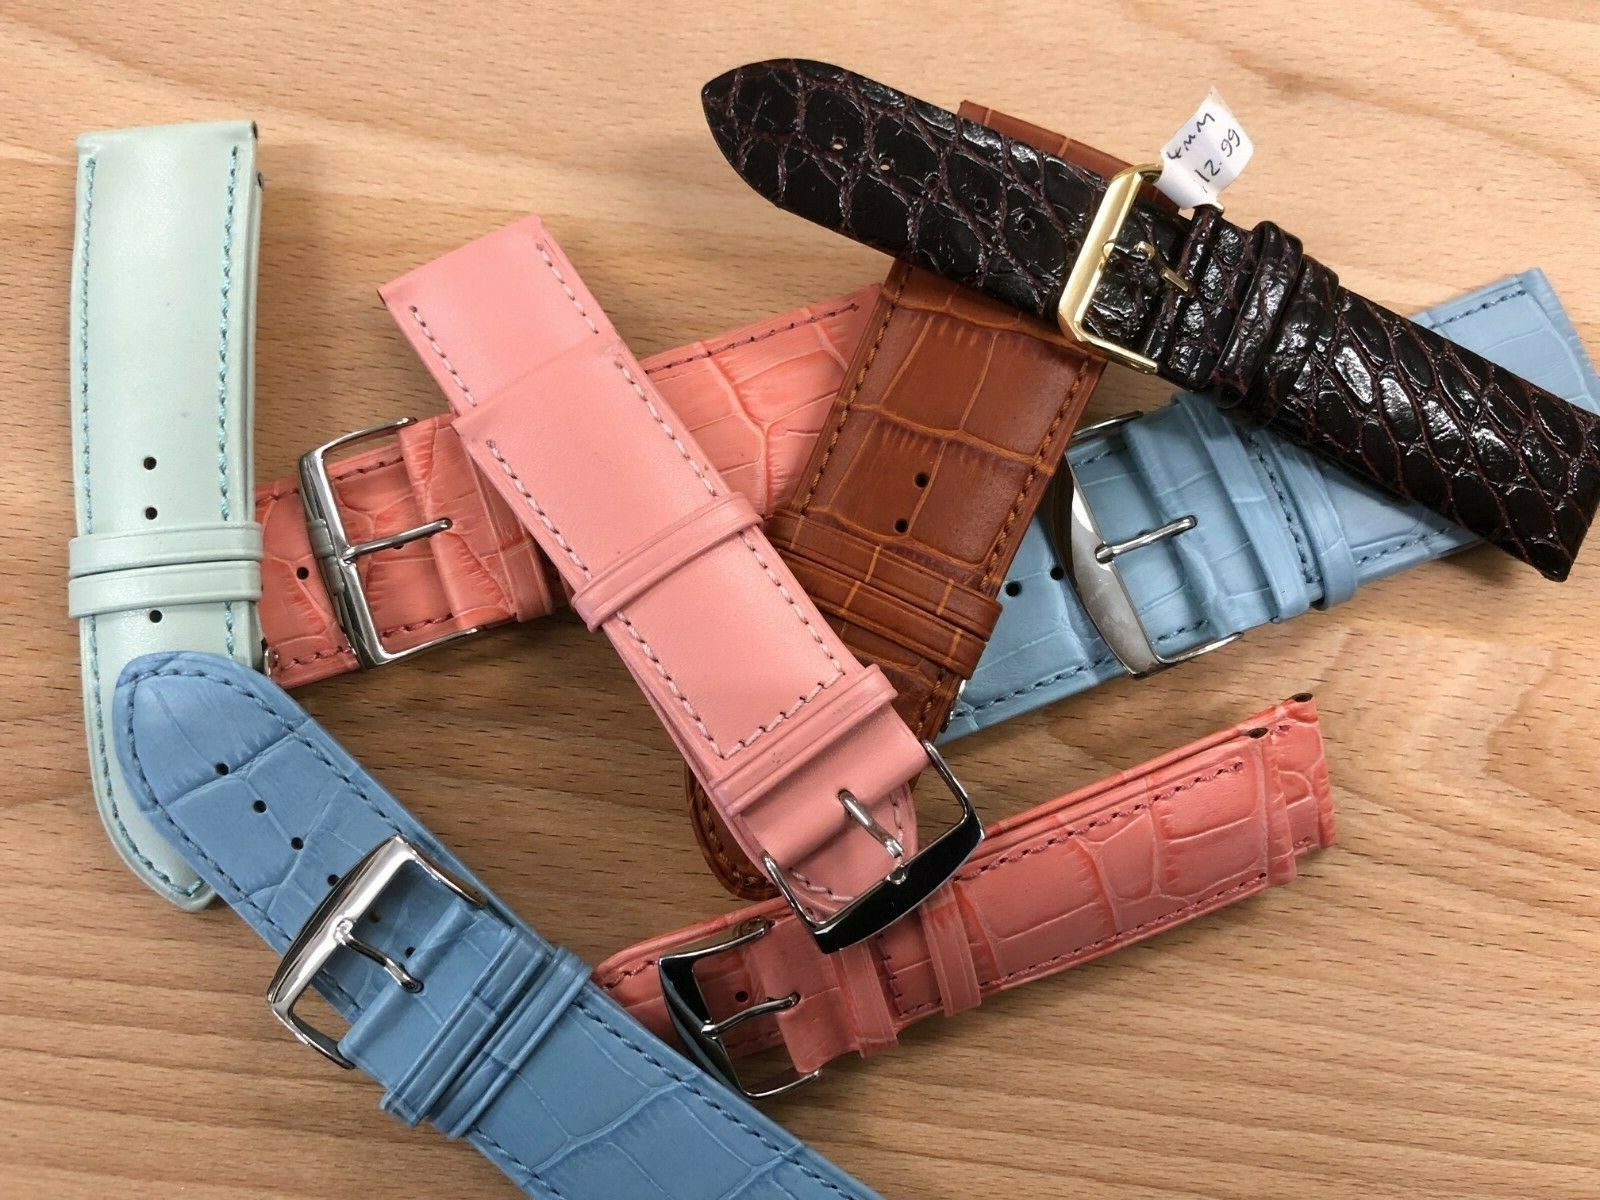 Job lot of 8 assorted Extra wide sizes. LEATHER WATCHSTRAPS, BARGAIN, 24 - 36mm